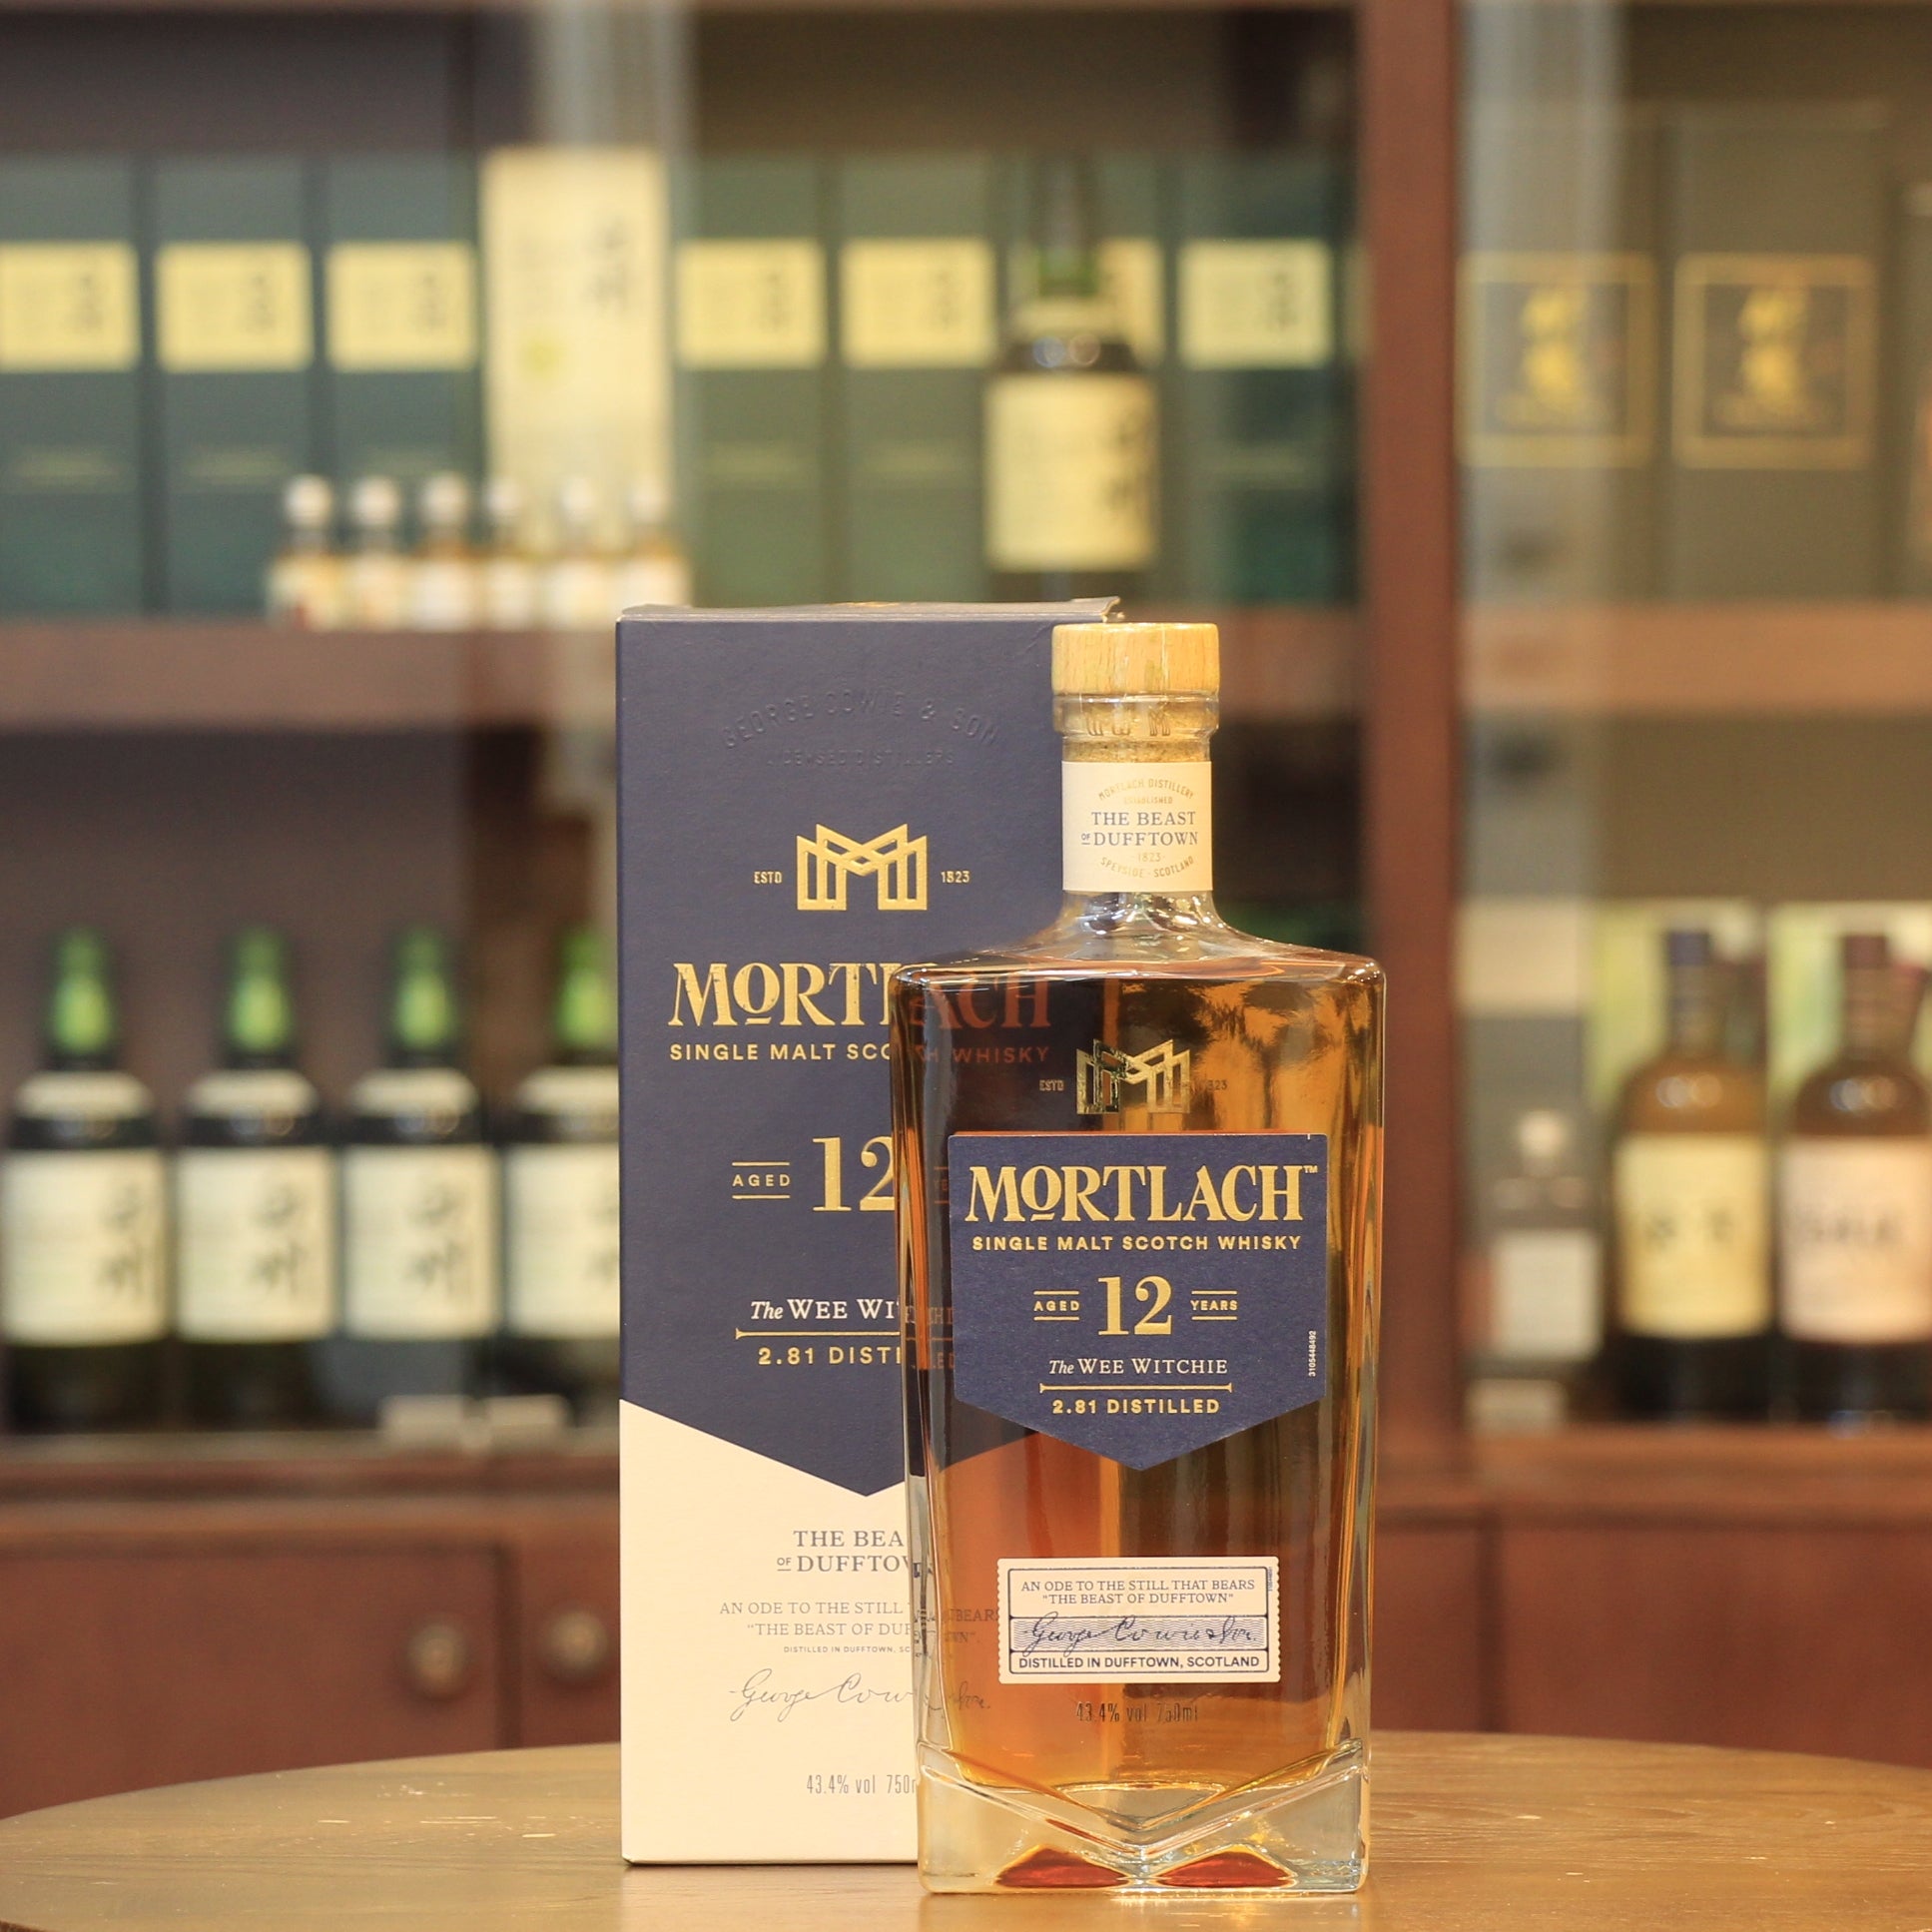 Matured for 12 years in a combination of sherry and bourbon casks, this 12 year bottling is named after the smallest of their six copper stills, named "The Wee Witchie". Mortlach's unique and precise 2.81 times distillation technique which is 0.81 more than the usual Scotch standard has also given it the reputation as the "Beast of Dufftown". Rich and fruity with hints of umami, light spice, dark chocolate and cherries leading to a smooth yet dry finish. (Tasting Notes from the Producer)